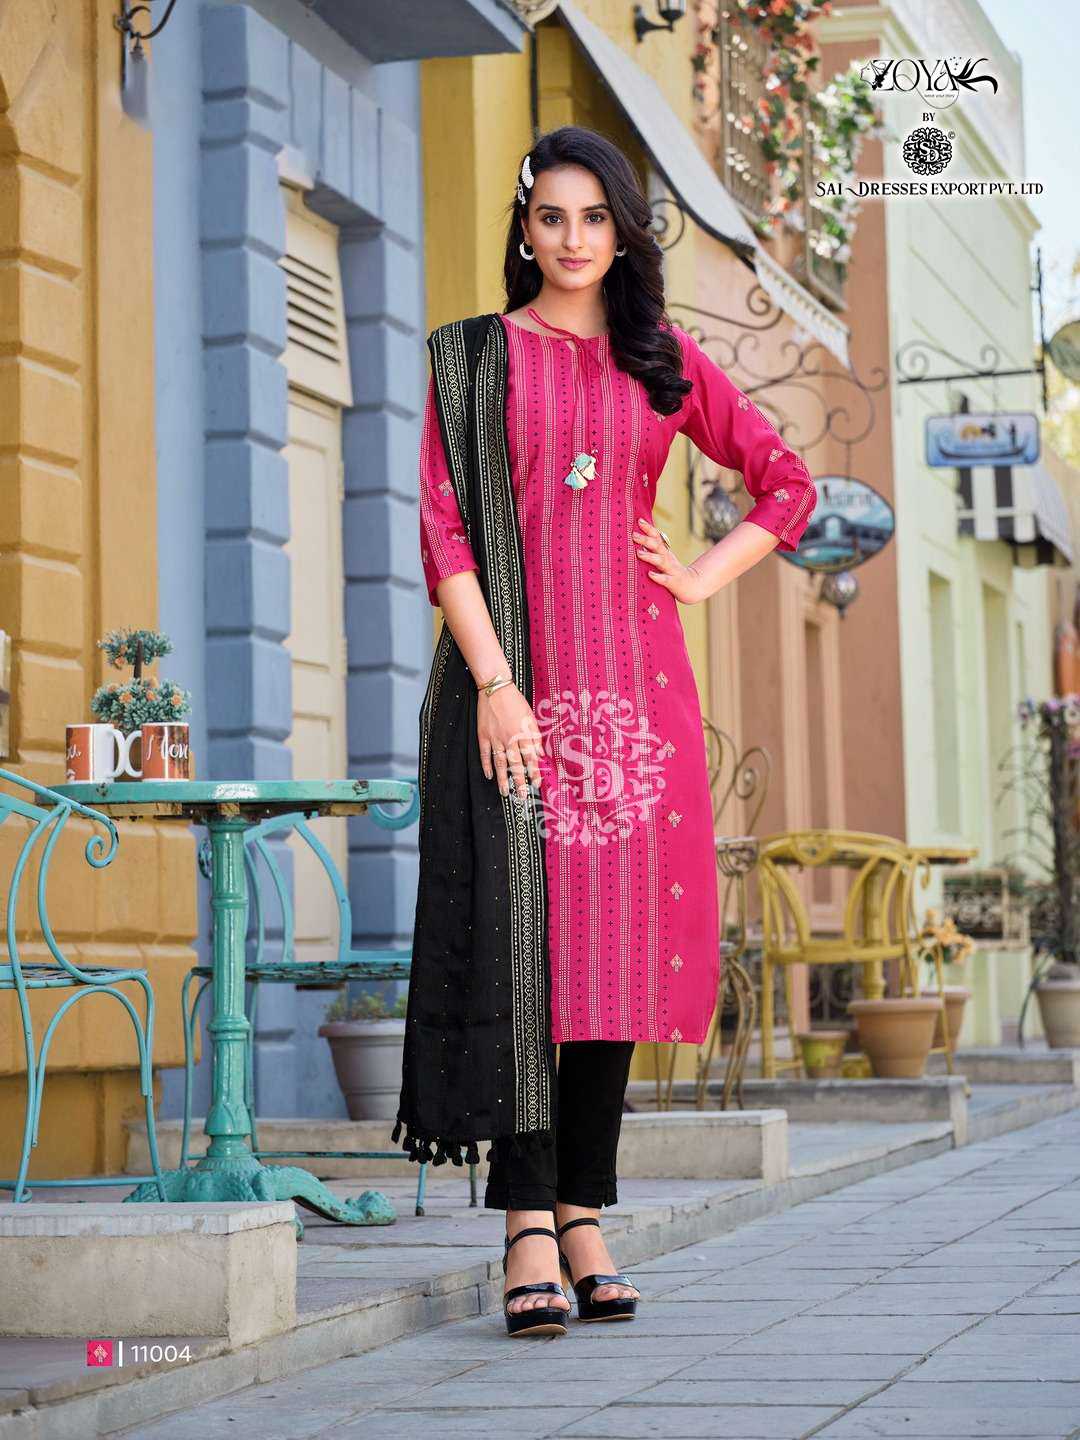 SAI DRESSES PRESENT SELINA READY TO CASUAL WEAR  STRAIGHT CUT WITH PANT STYLE DESIGNER 3 PIECE SUITS IN WHOLESALE RATE IN SURAT